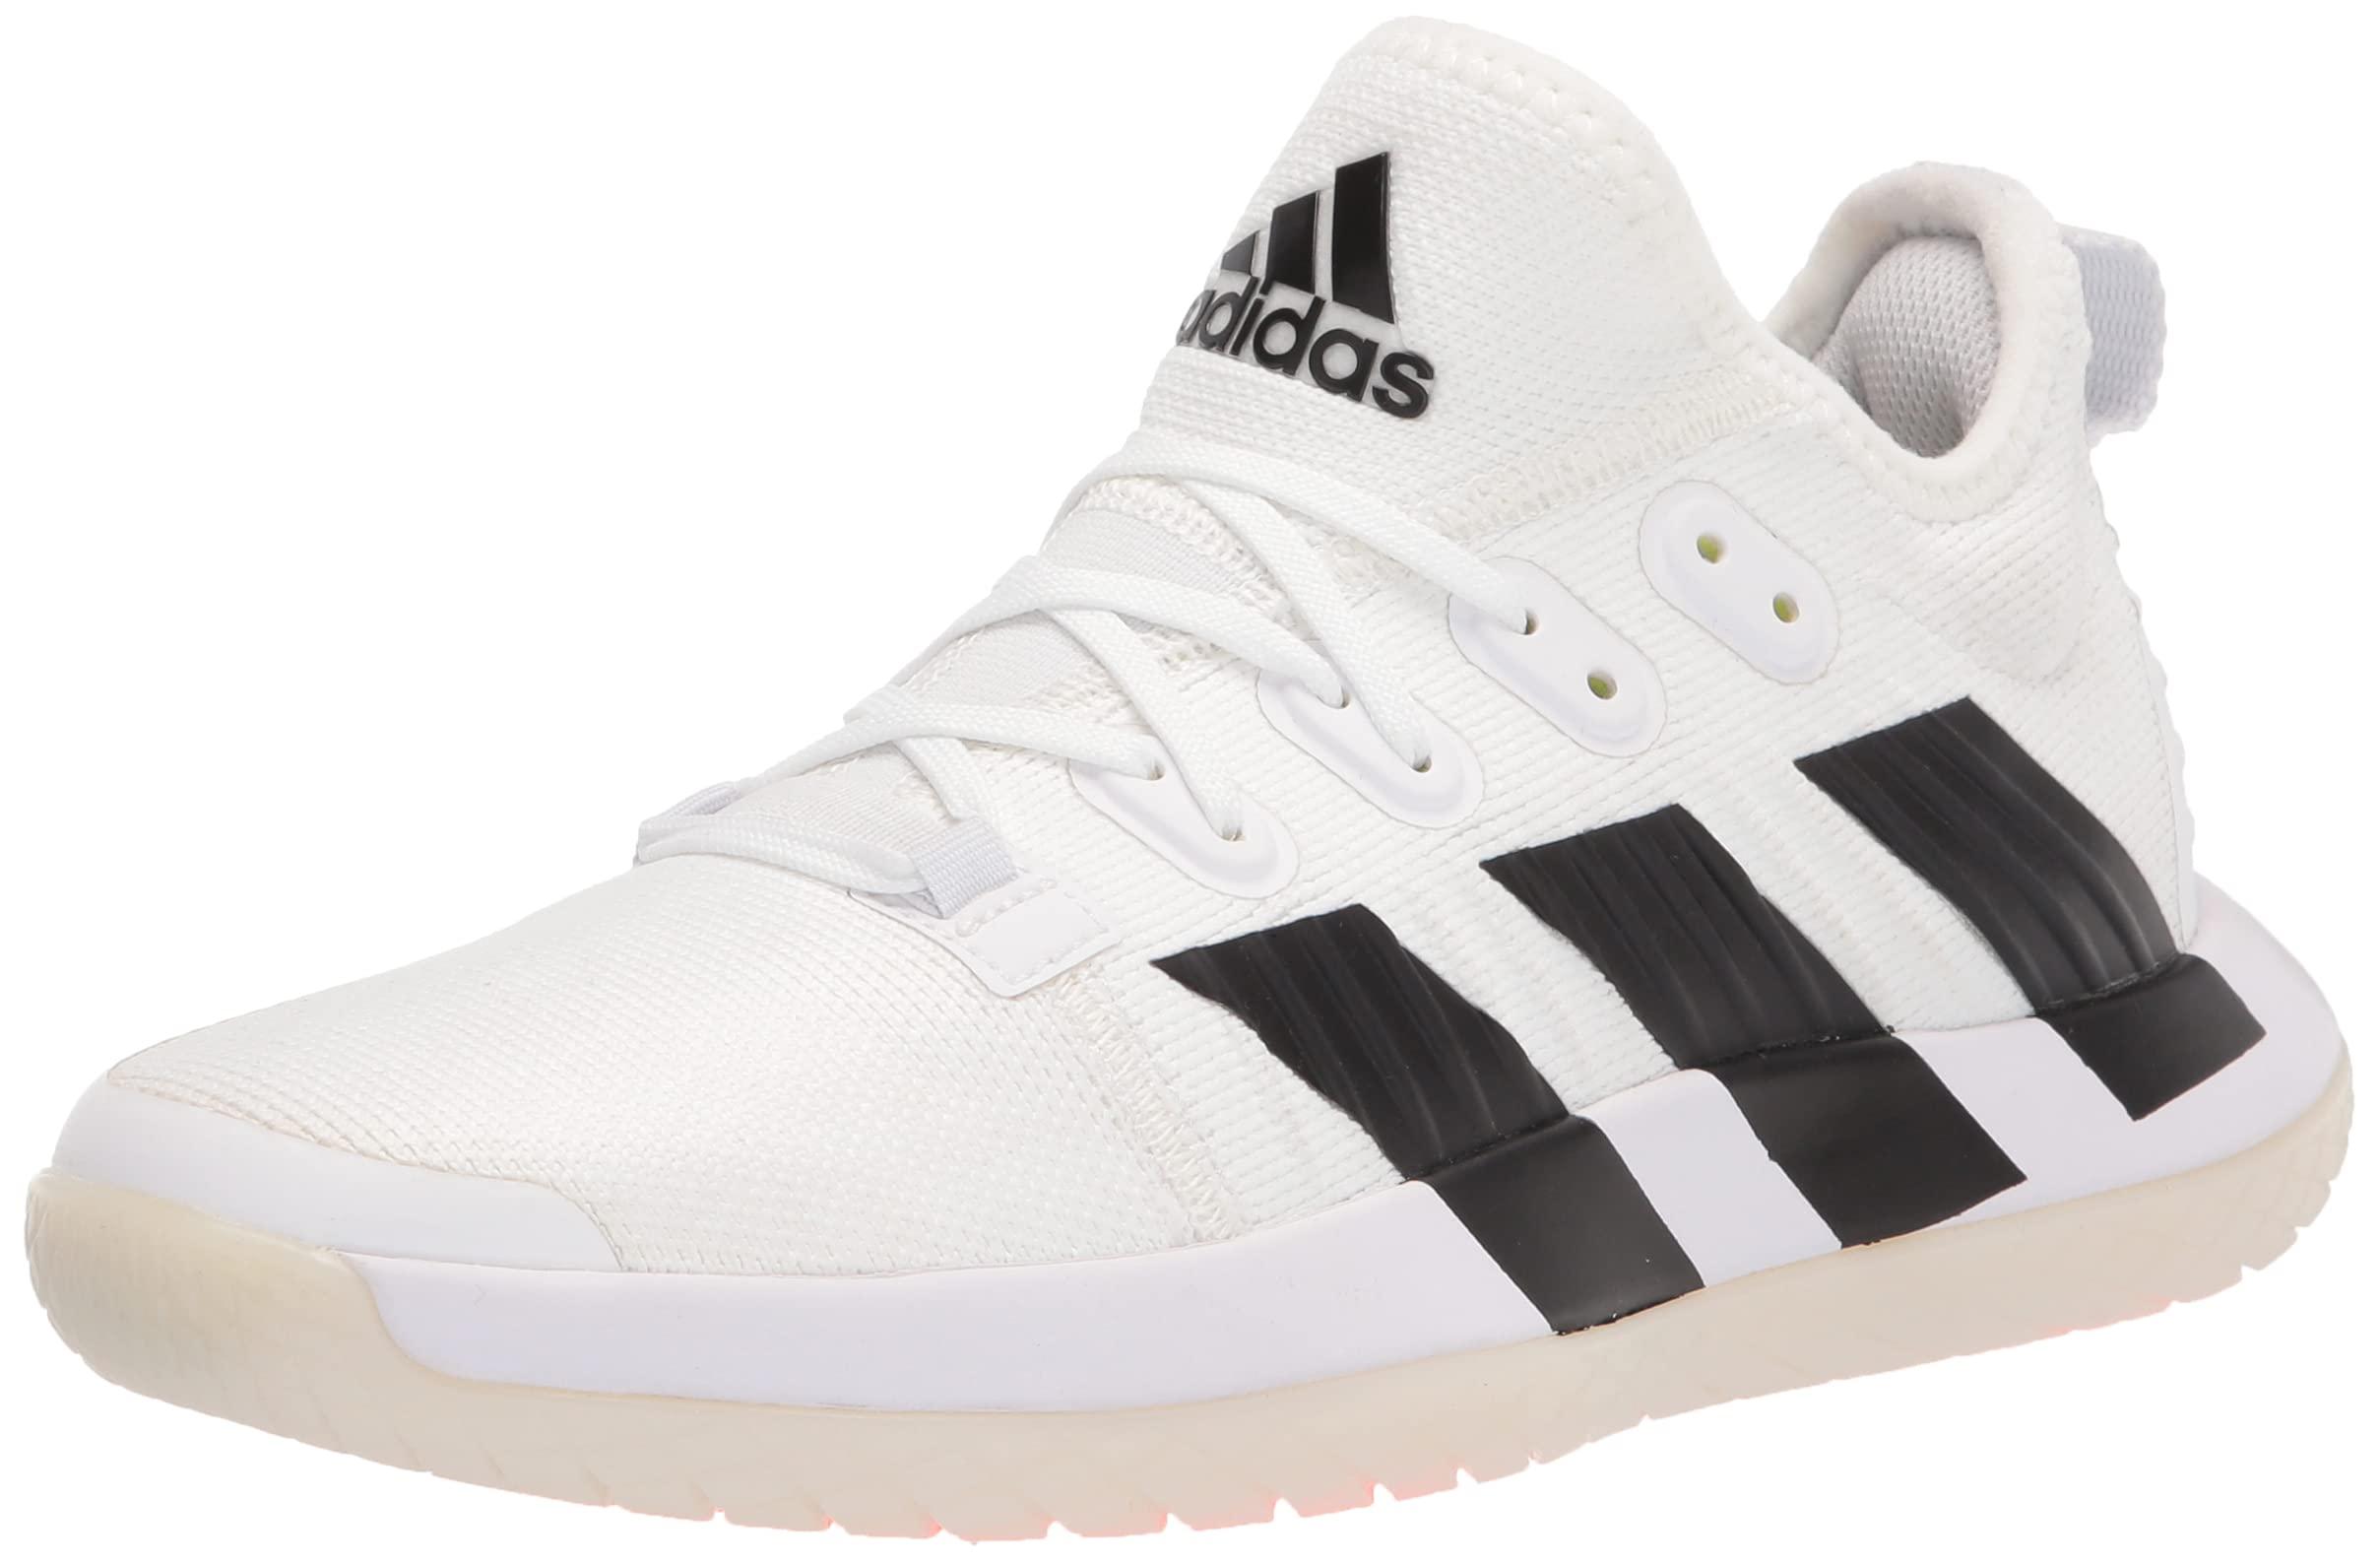 adidas Male Stabil Generation Shoes White/black/solar Red-13 Men Lyst